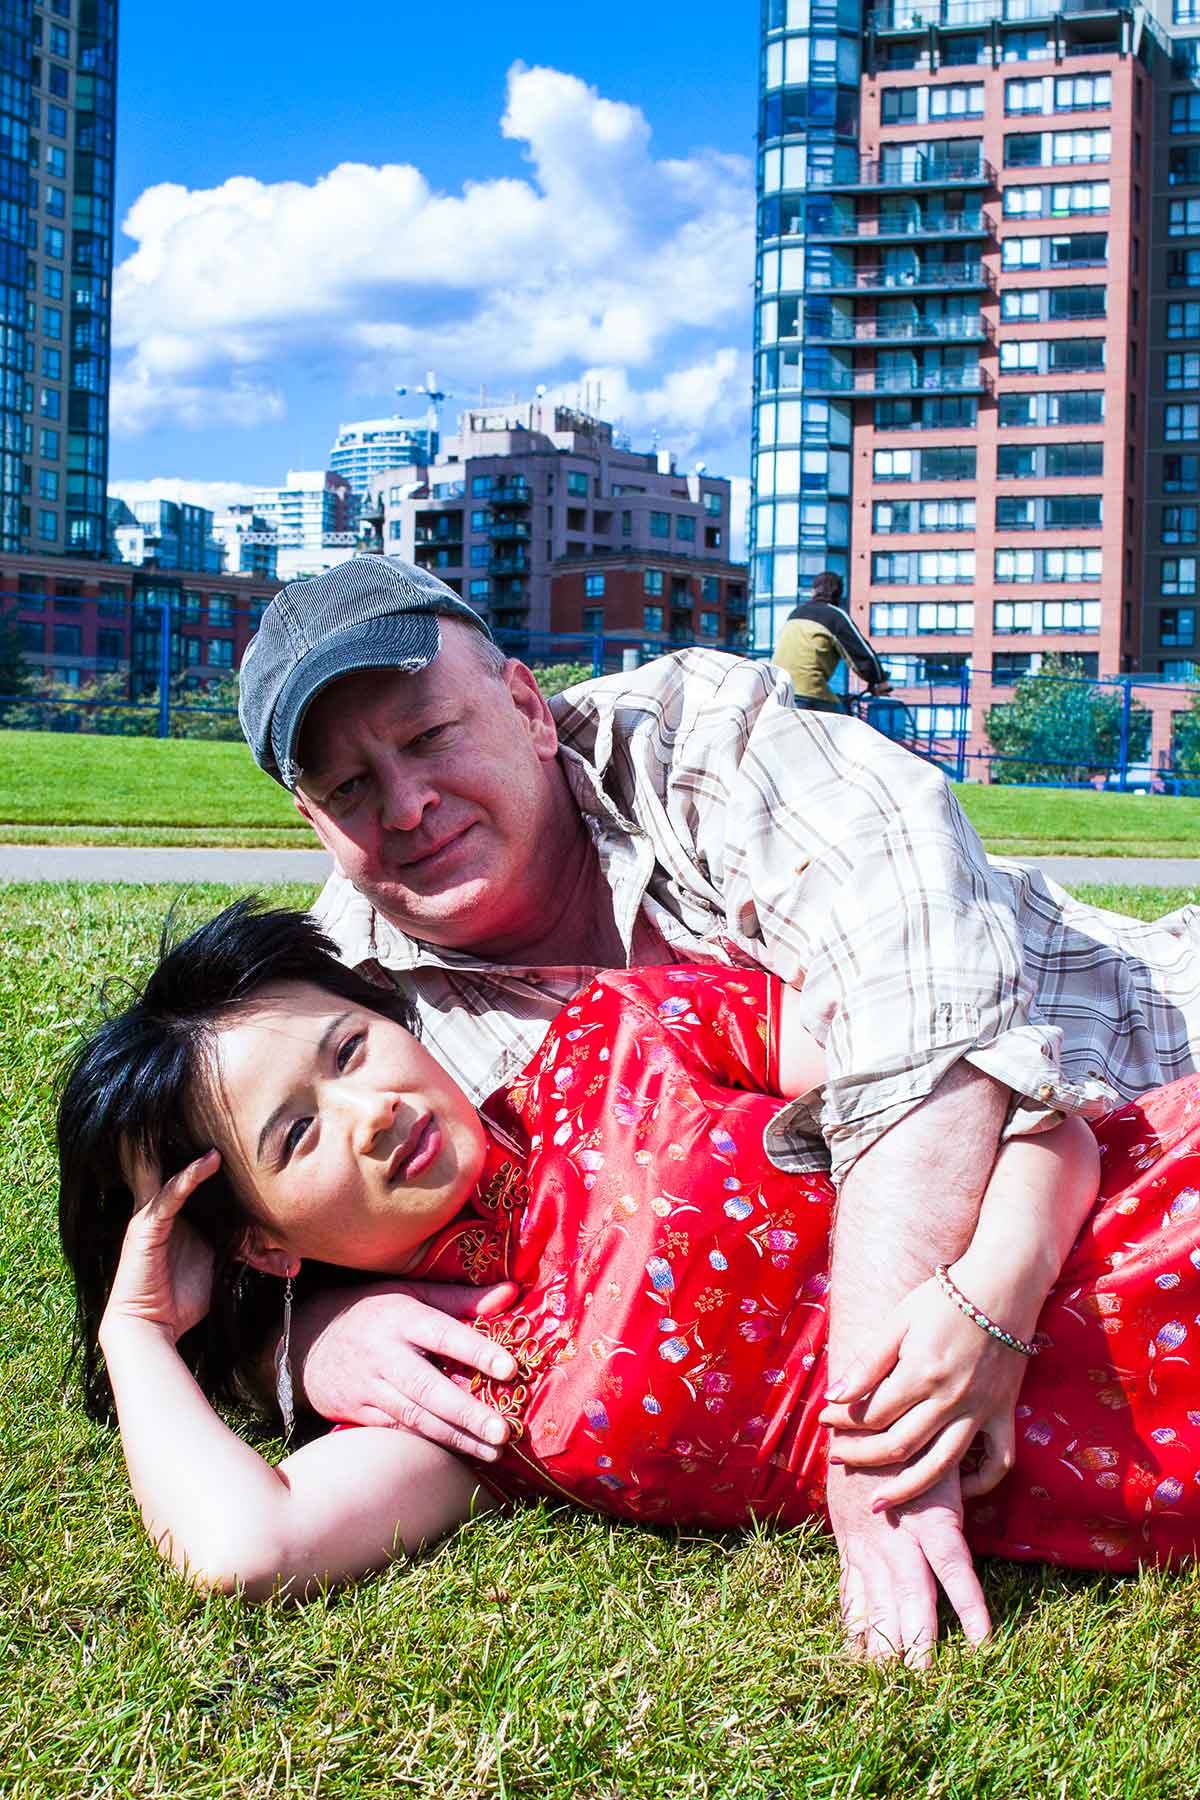 Chun Hua Catherine Dong asks strangers on streets to be her husbands for a minute. She and her one-minute husband take a photo together to capture their special moment